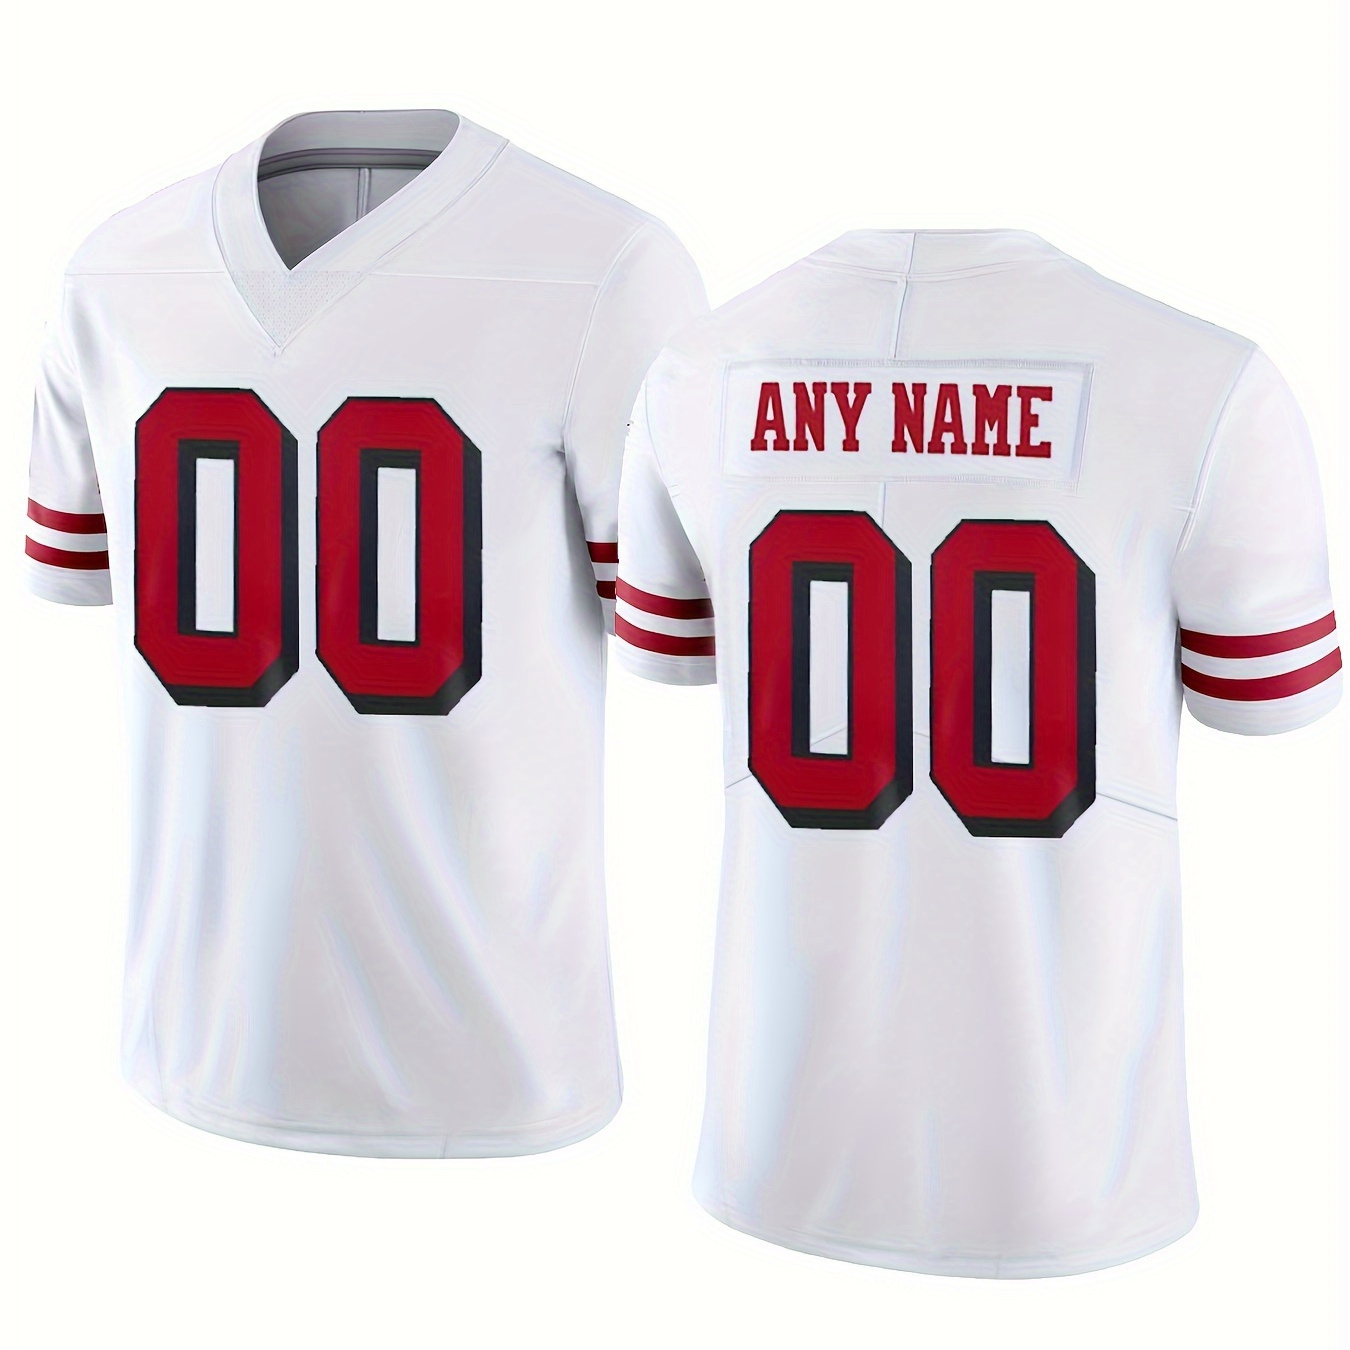 

Customized Name And Number Embroidery, Men's Short Sleeve V-neck Football Jersey, Breathable Sports Shirt For Team Training